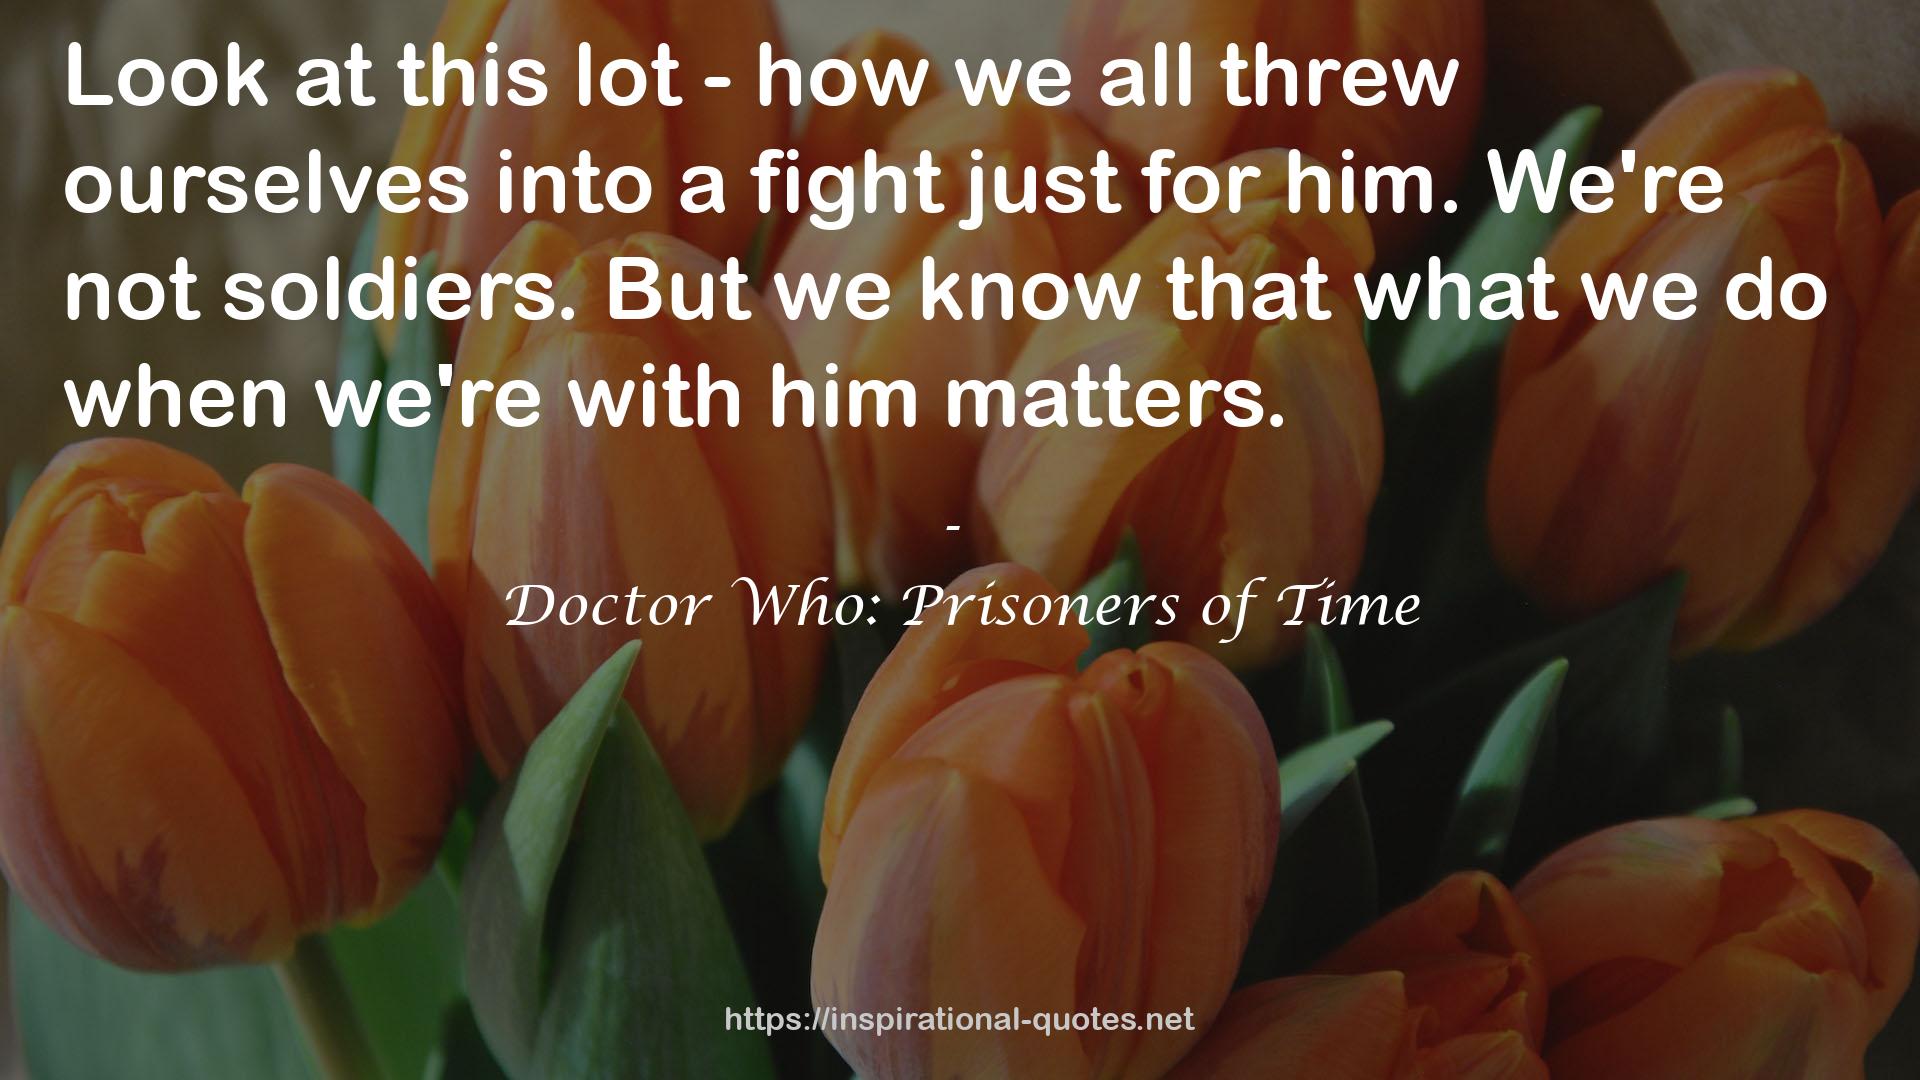 Doctor Who: Prisoners of Time QUOTES